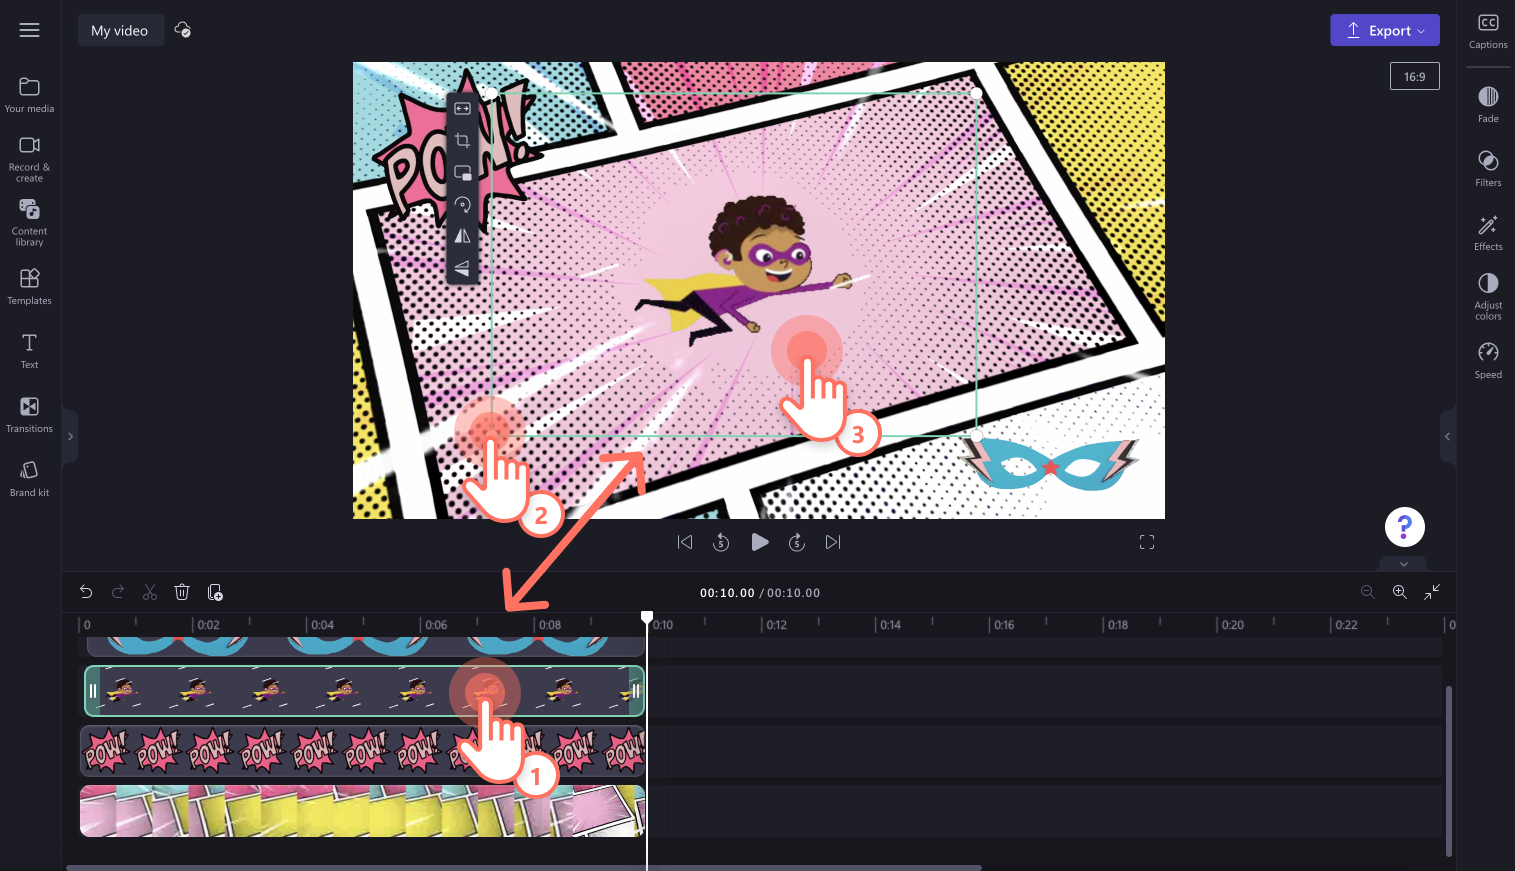 An image of a user editing a GIF on the video preview.